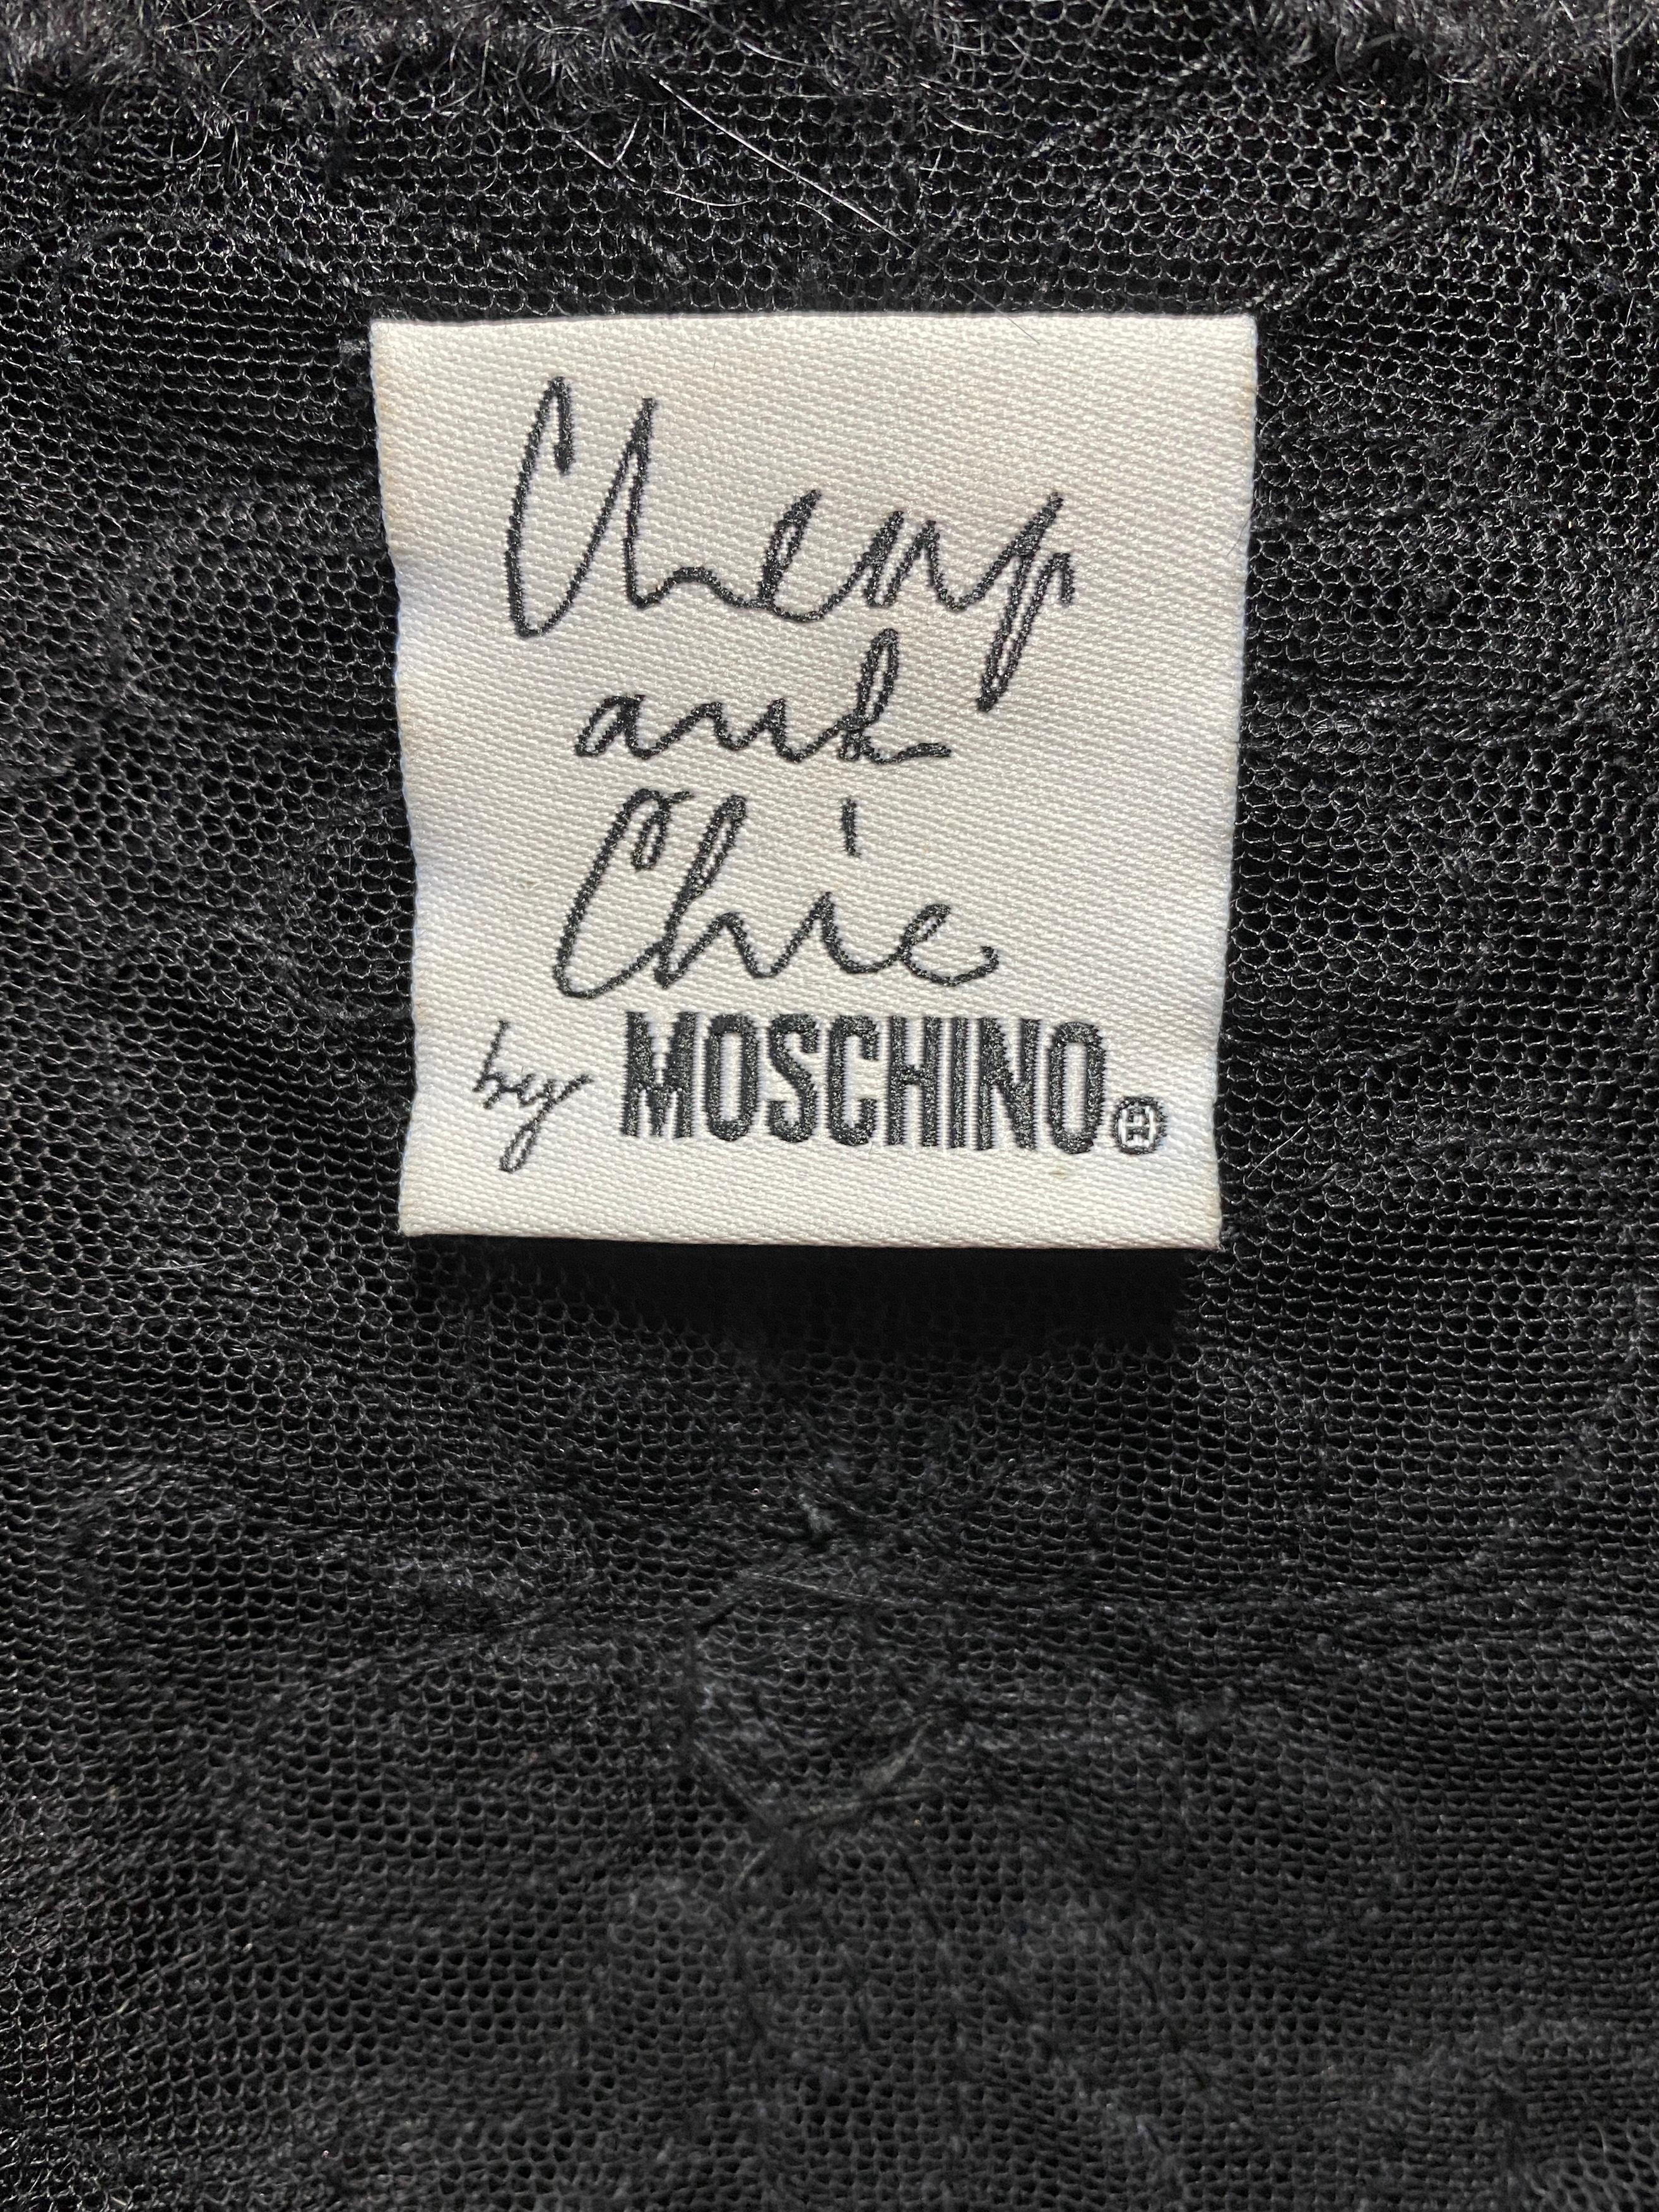 1990s Moschino Cheap & Chic Black Beaded Textured Slip Dress For Sale 2